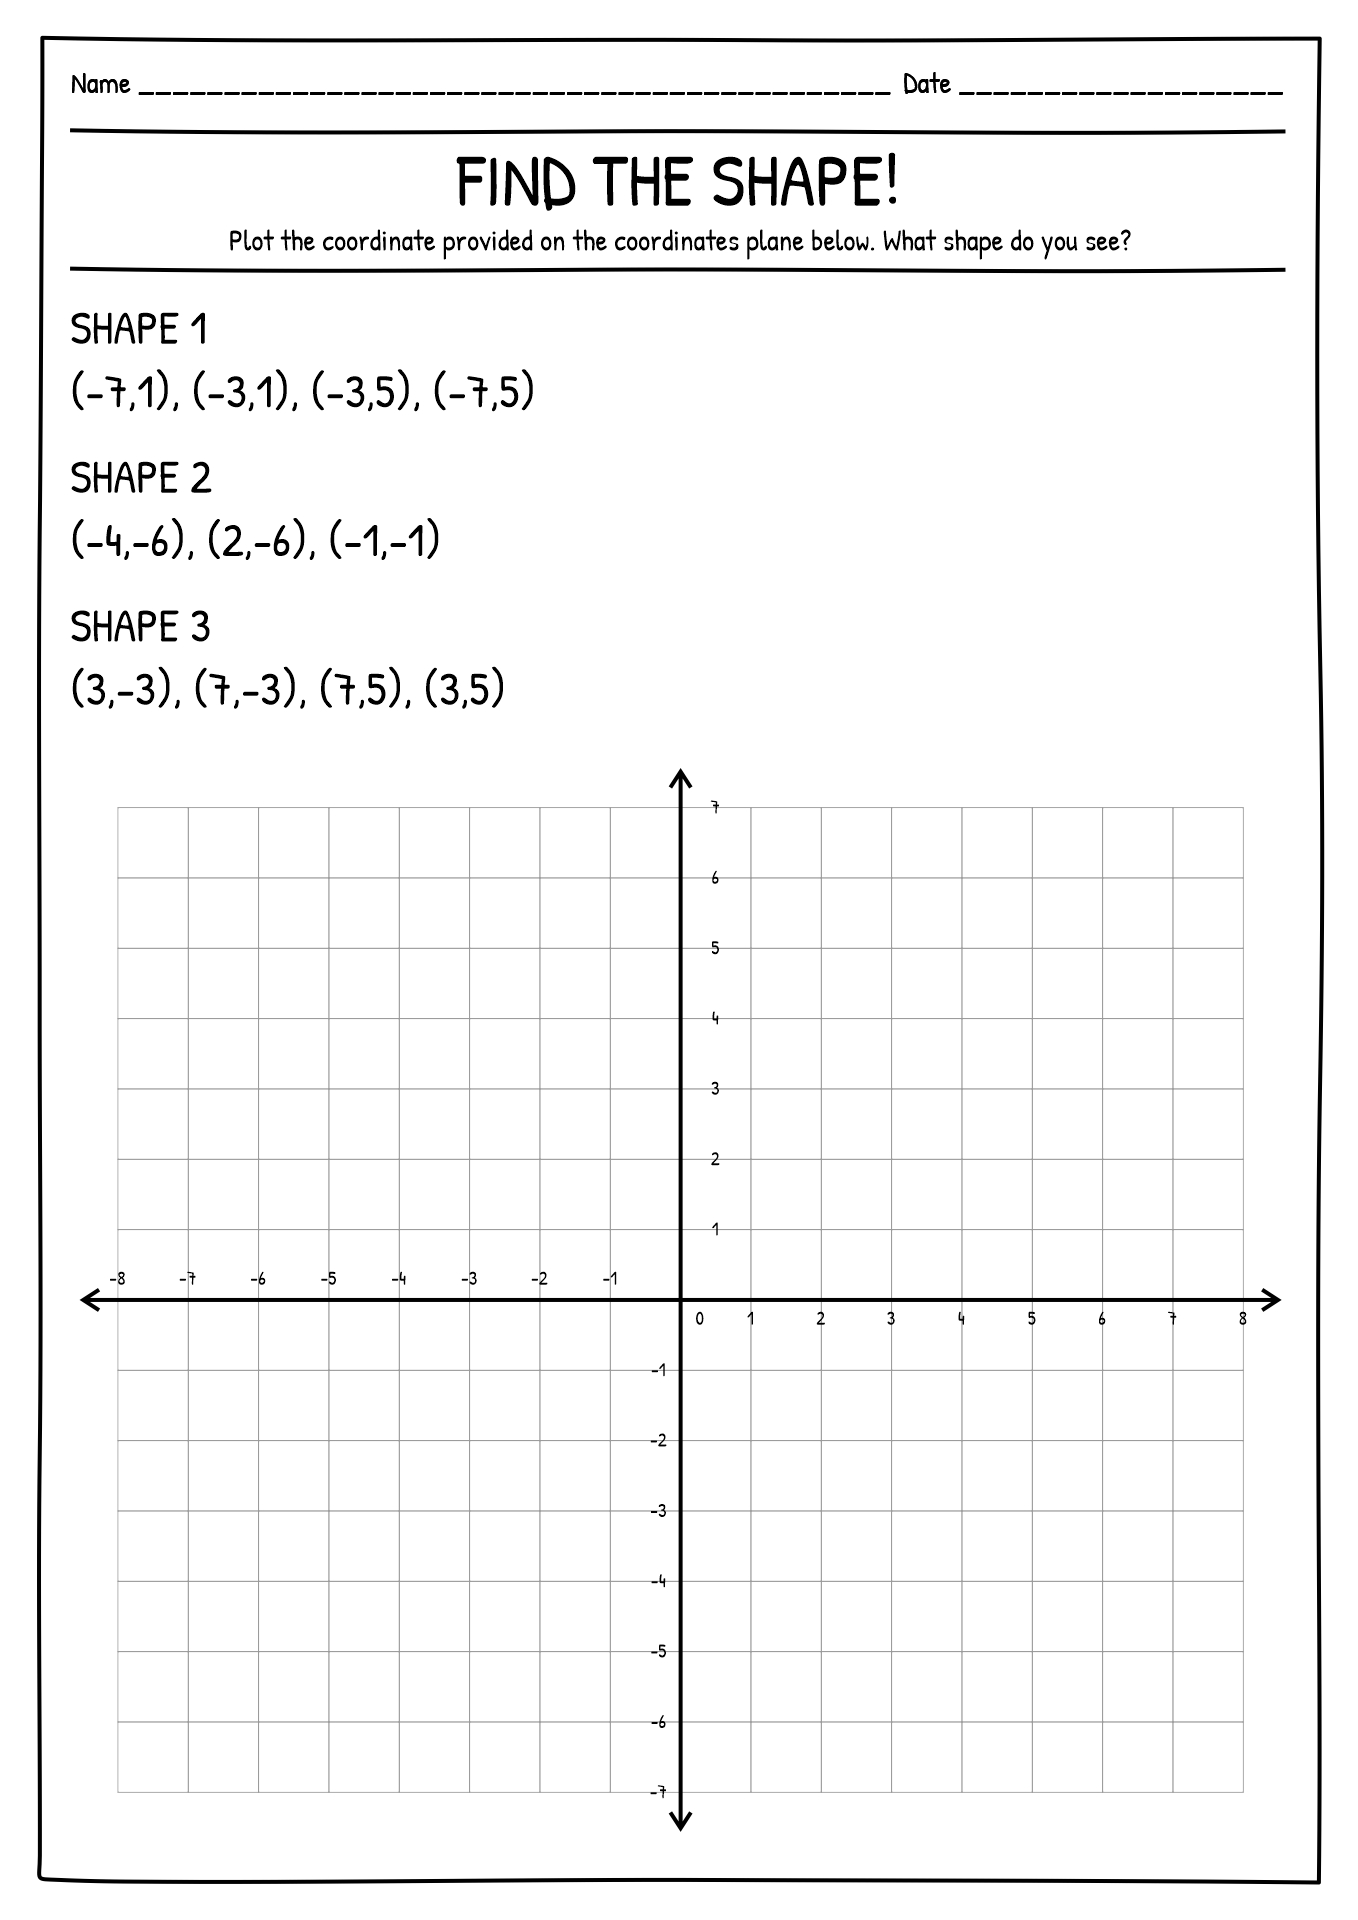 10-best-images-of-coordinate-plane-connect-dots-worksheets-coordinate-plane-designs-extreme